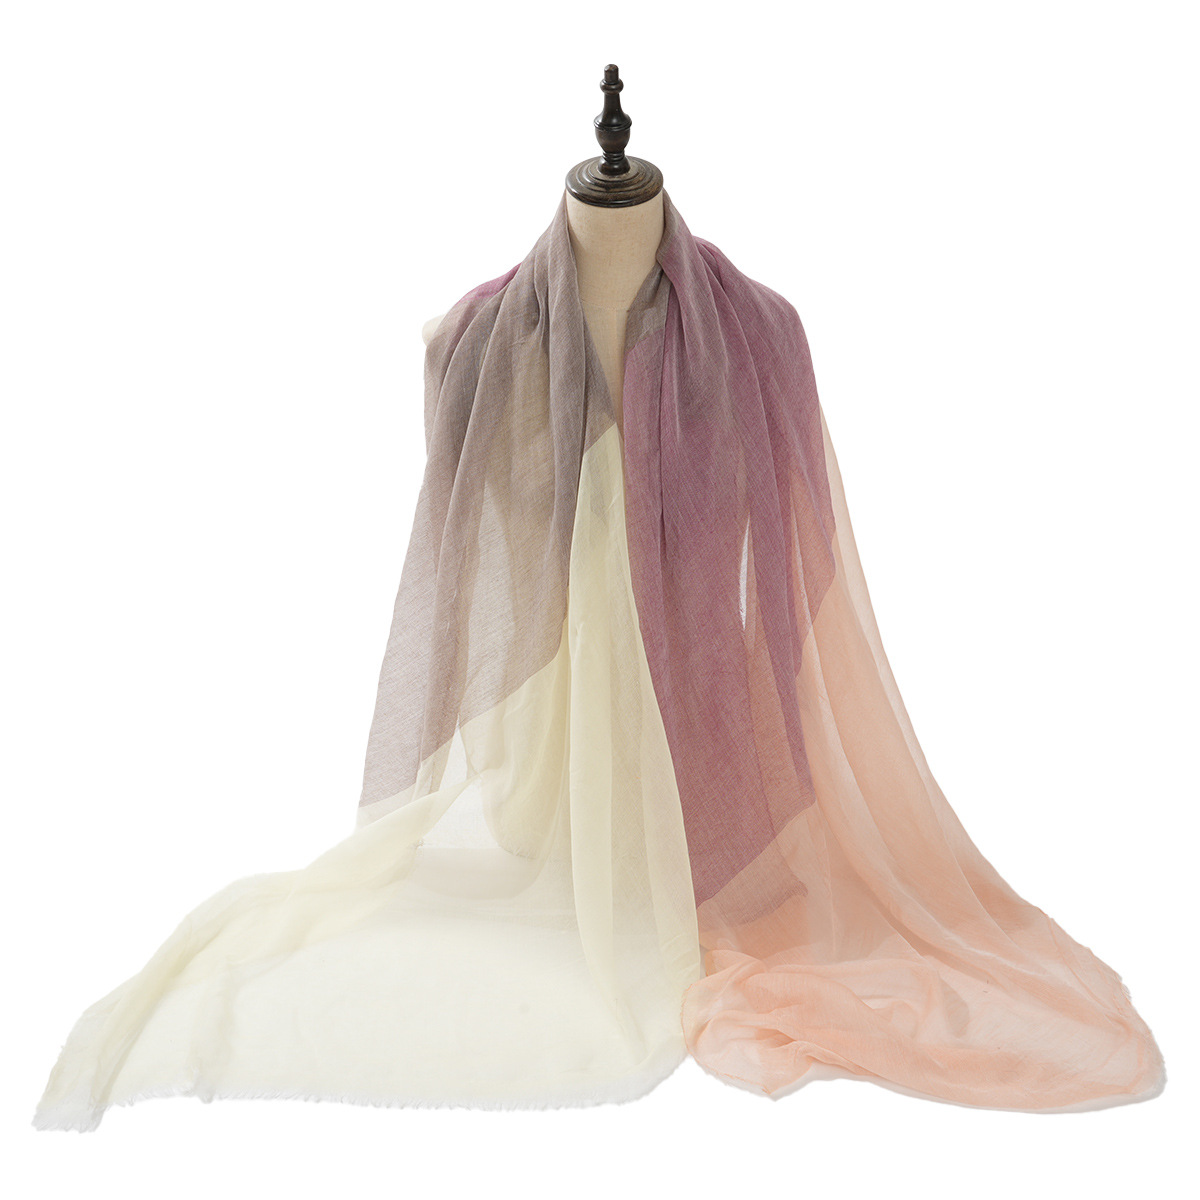 One Piece Dropshipping Best Seller in Europe and America New Spring and Summer Leisure Style Chiffon Gradient Color Scarf Fashion All-Matching Long Shawl